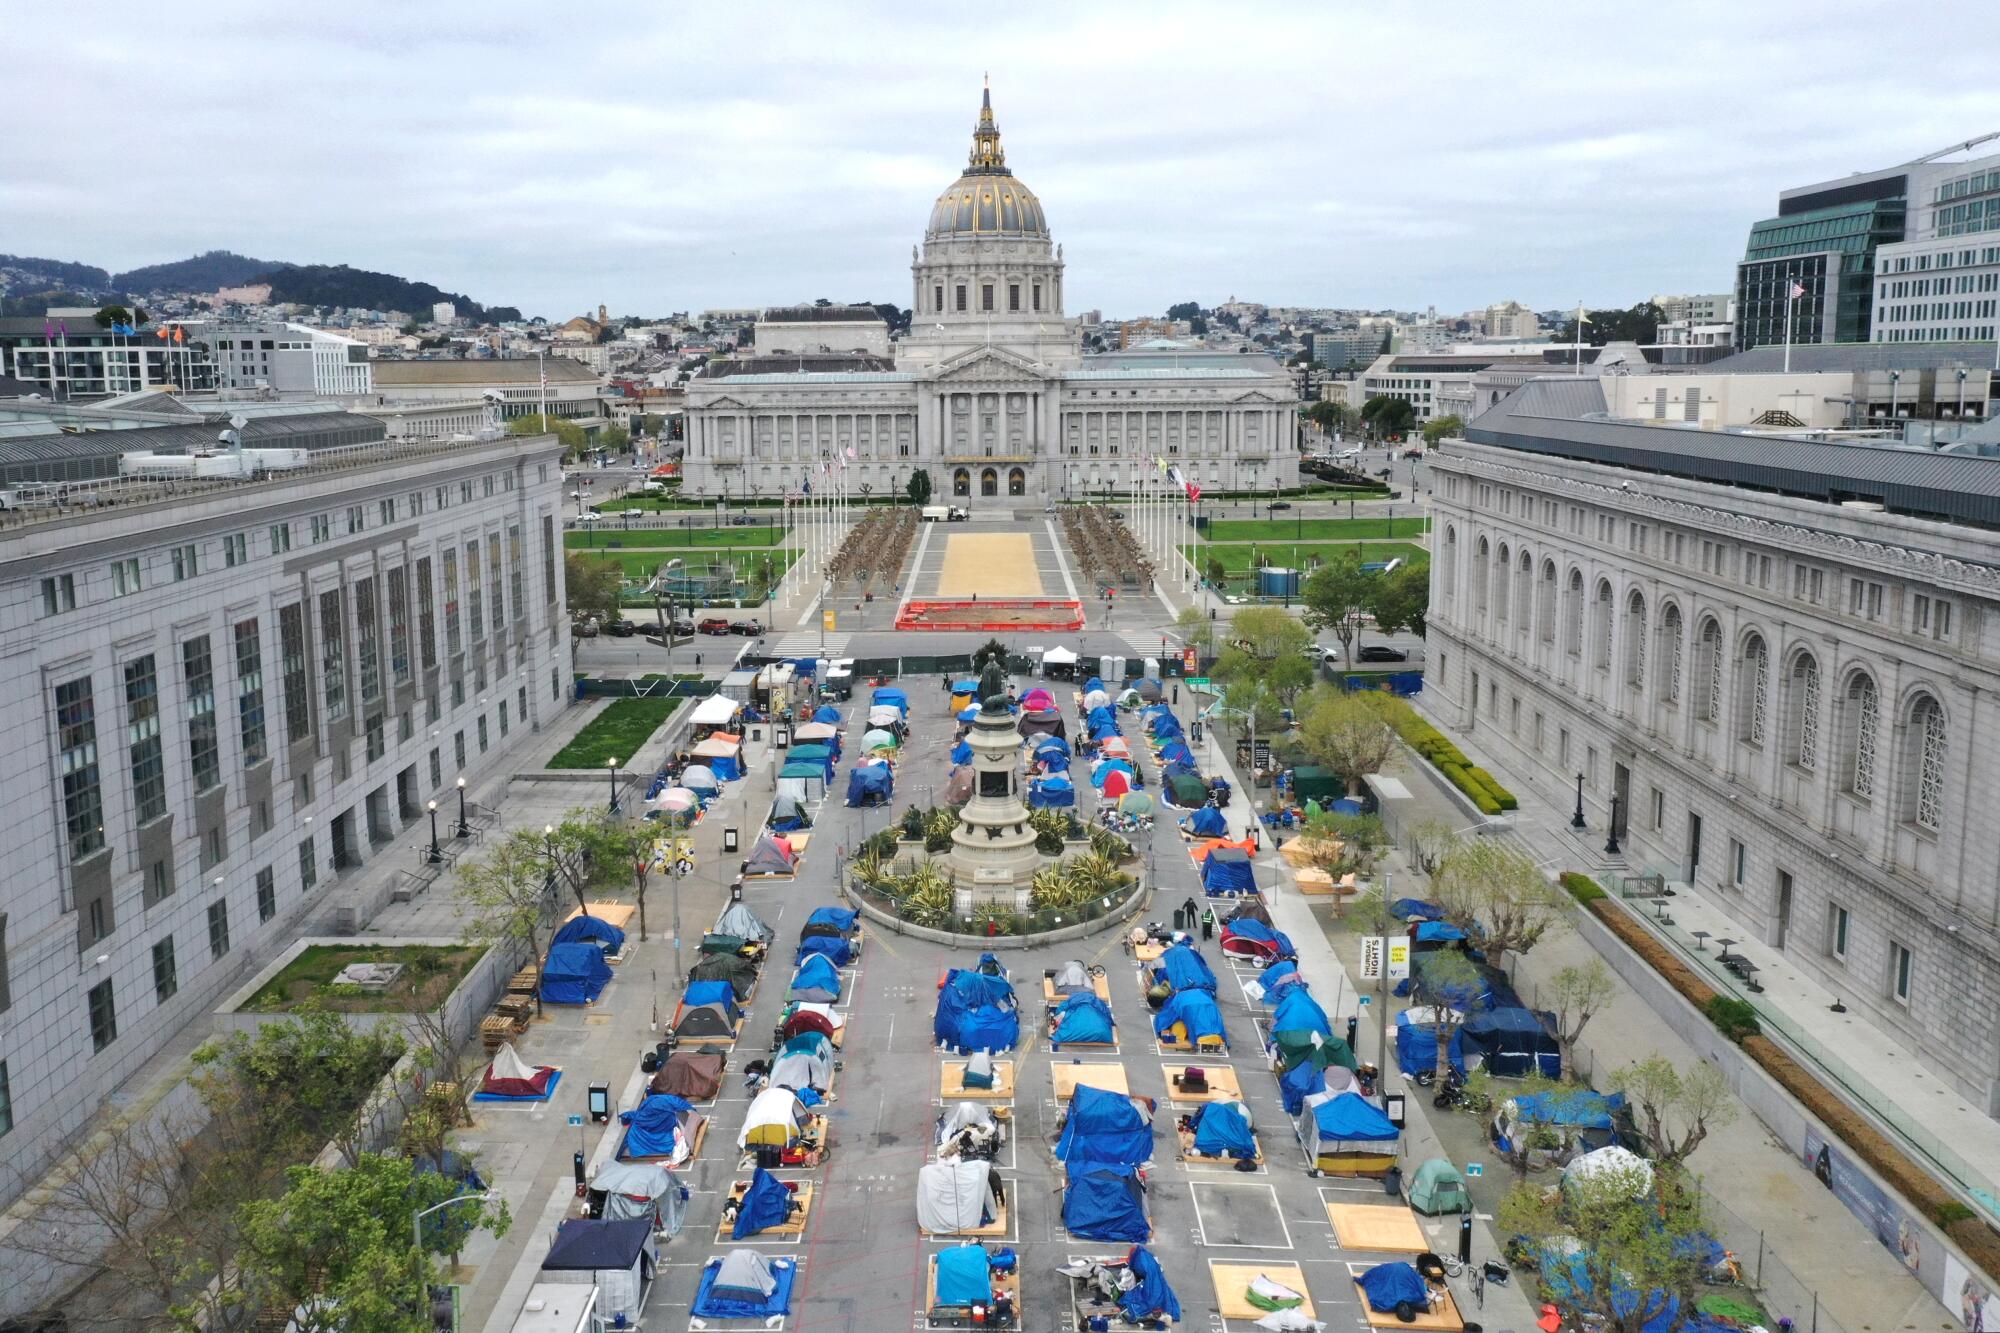 Rows of tents fill a plaza at a sanctioned homeless encampment in San Francisco.